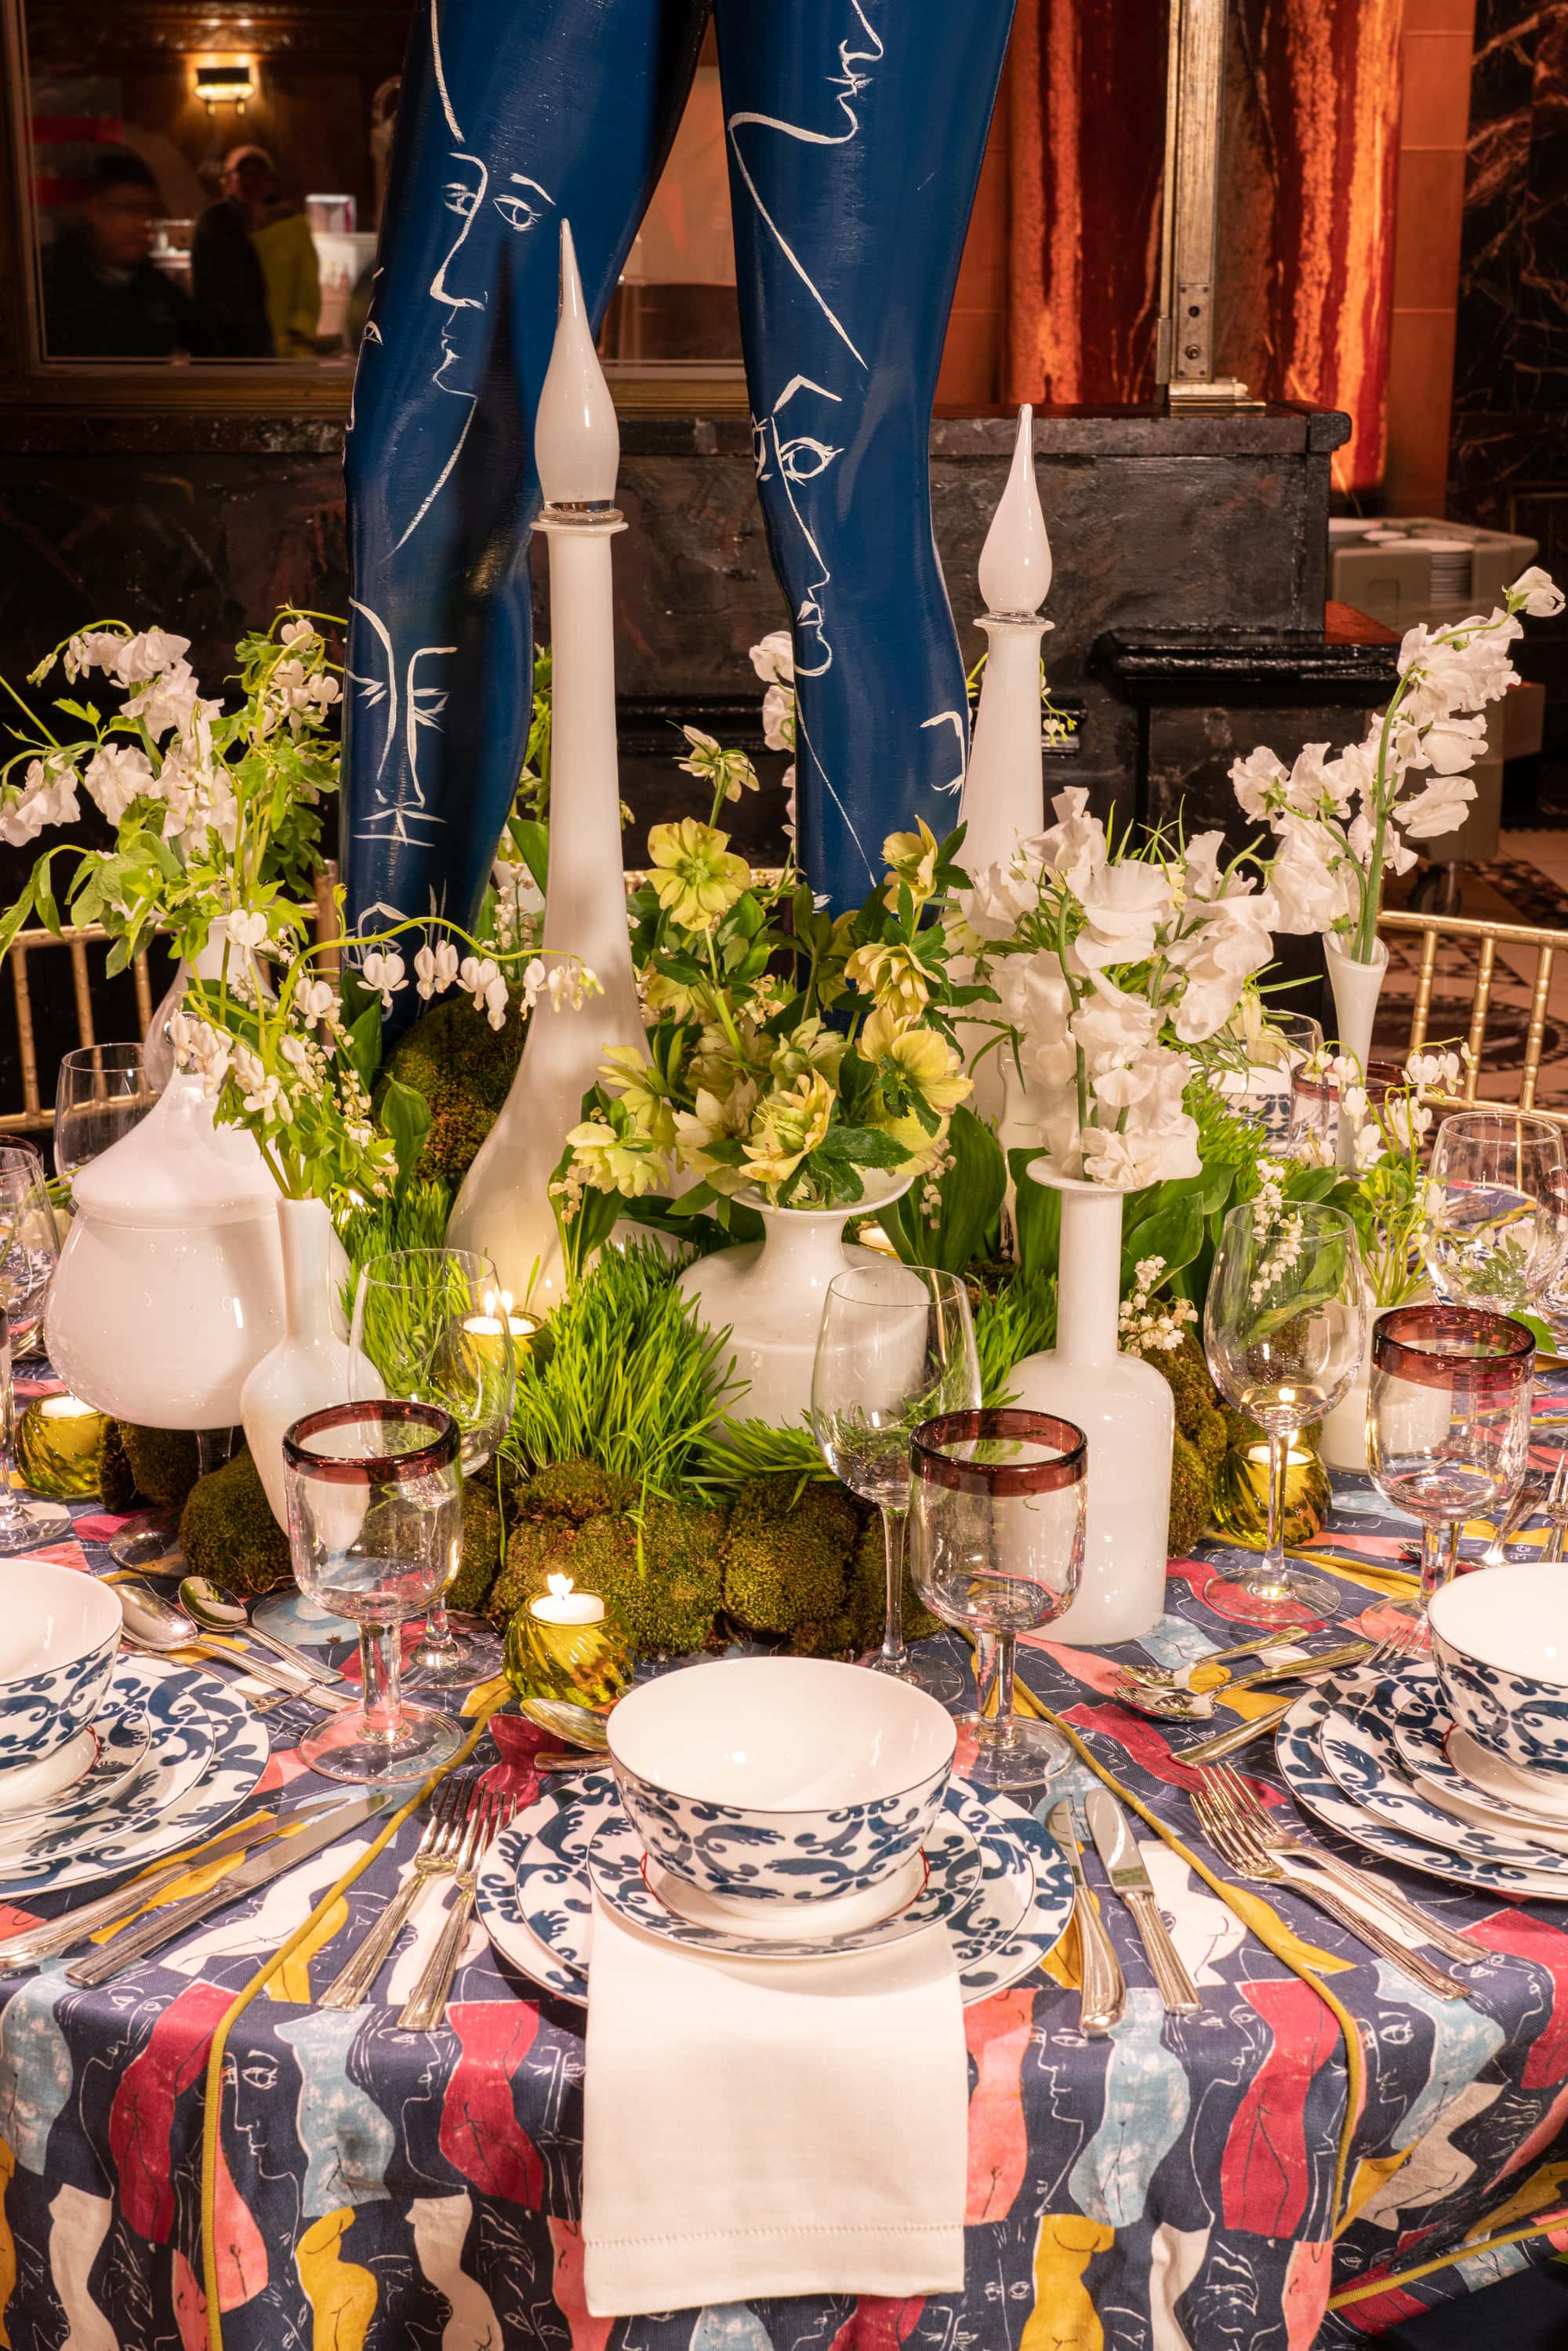 tablescape with a white glass bottles among greenery as a centerpiece